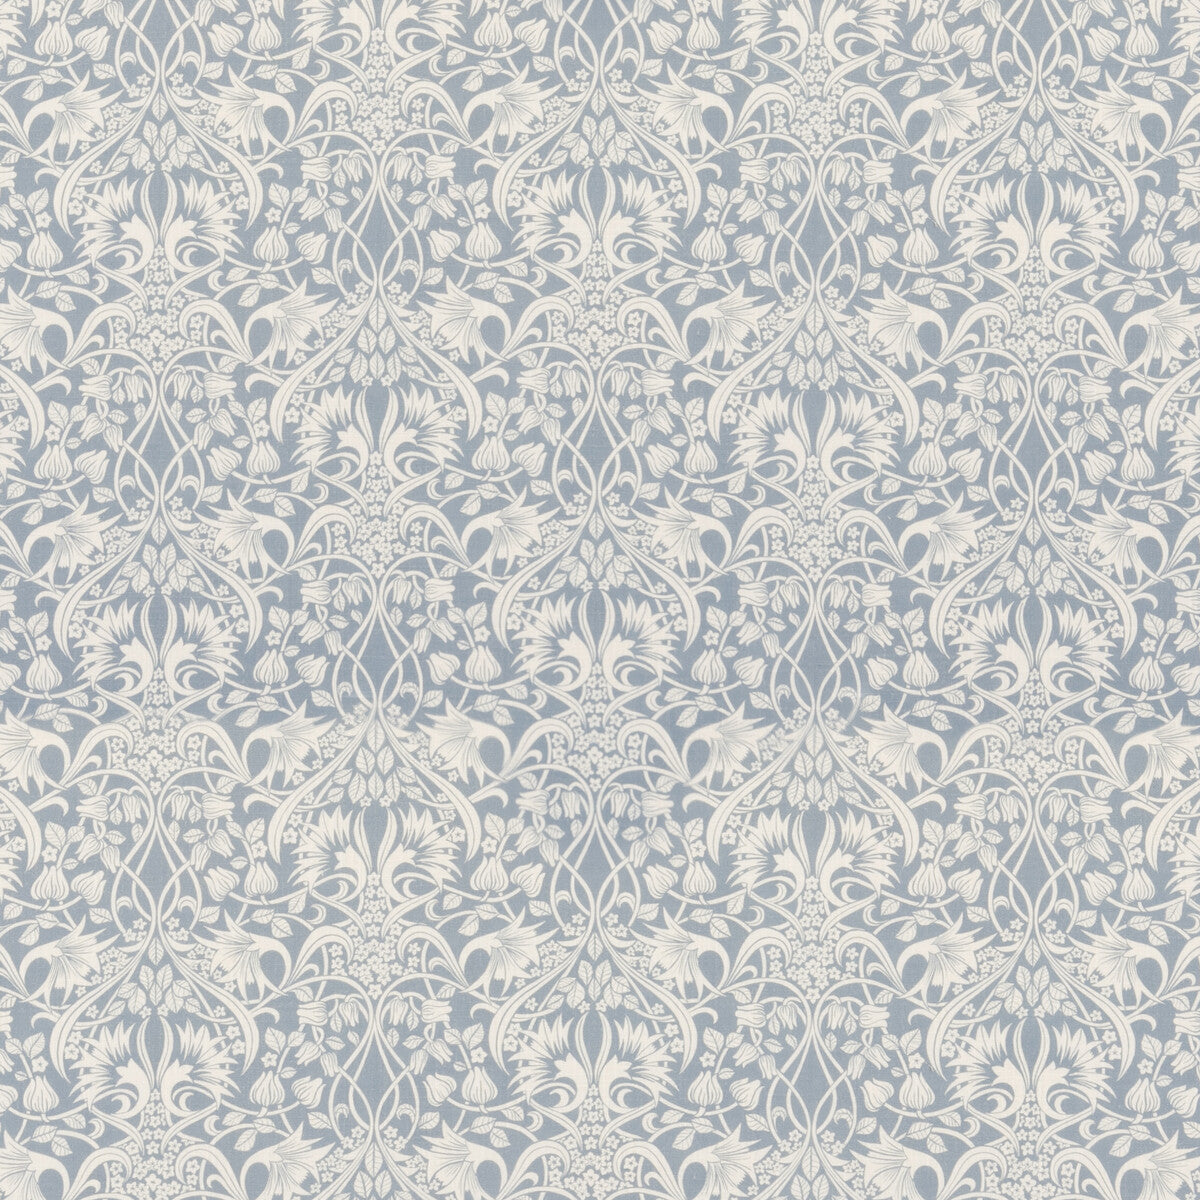 Fritillerie fabric in blue color - pattern BP10980.1.0 - by G P &amp; J Baker in the Original Brantwood Fabric collection